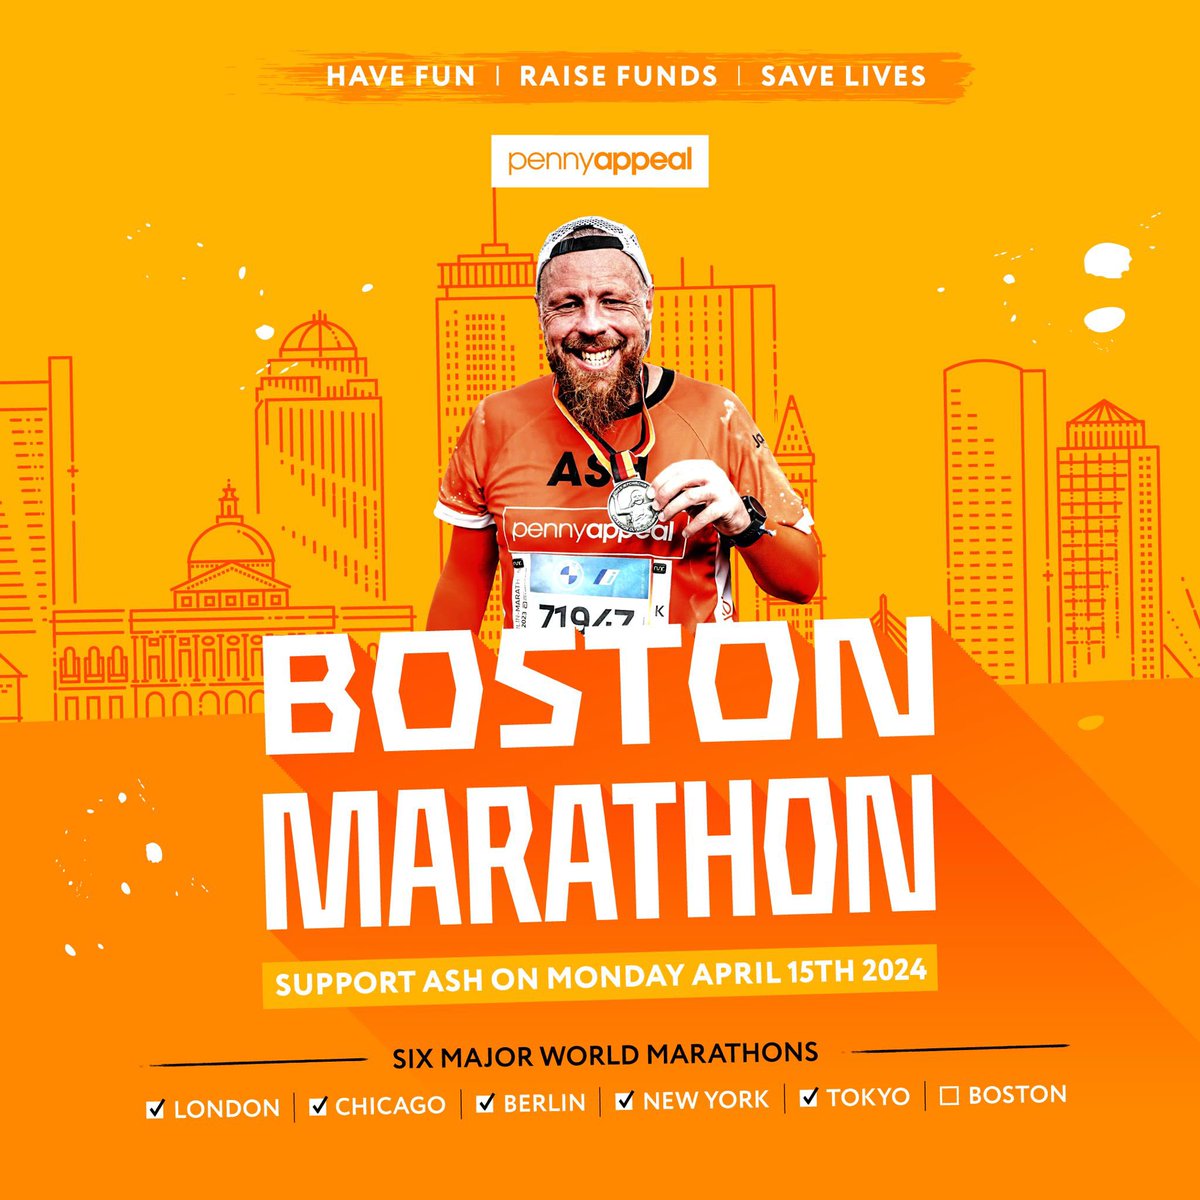 🏃‍♂️ Here he goes again… @ashrafwallace takes on the iconic @bostonmarathon! 🏃‍♂️ Running to secure his final for the @wmmajors & raising for @pennyappeal Please do support! 🔗 bit.ly/RunningBoston 🔗 #BostonMarathon #AbbottWMM #PennyAppeal #Running 🙌👟